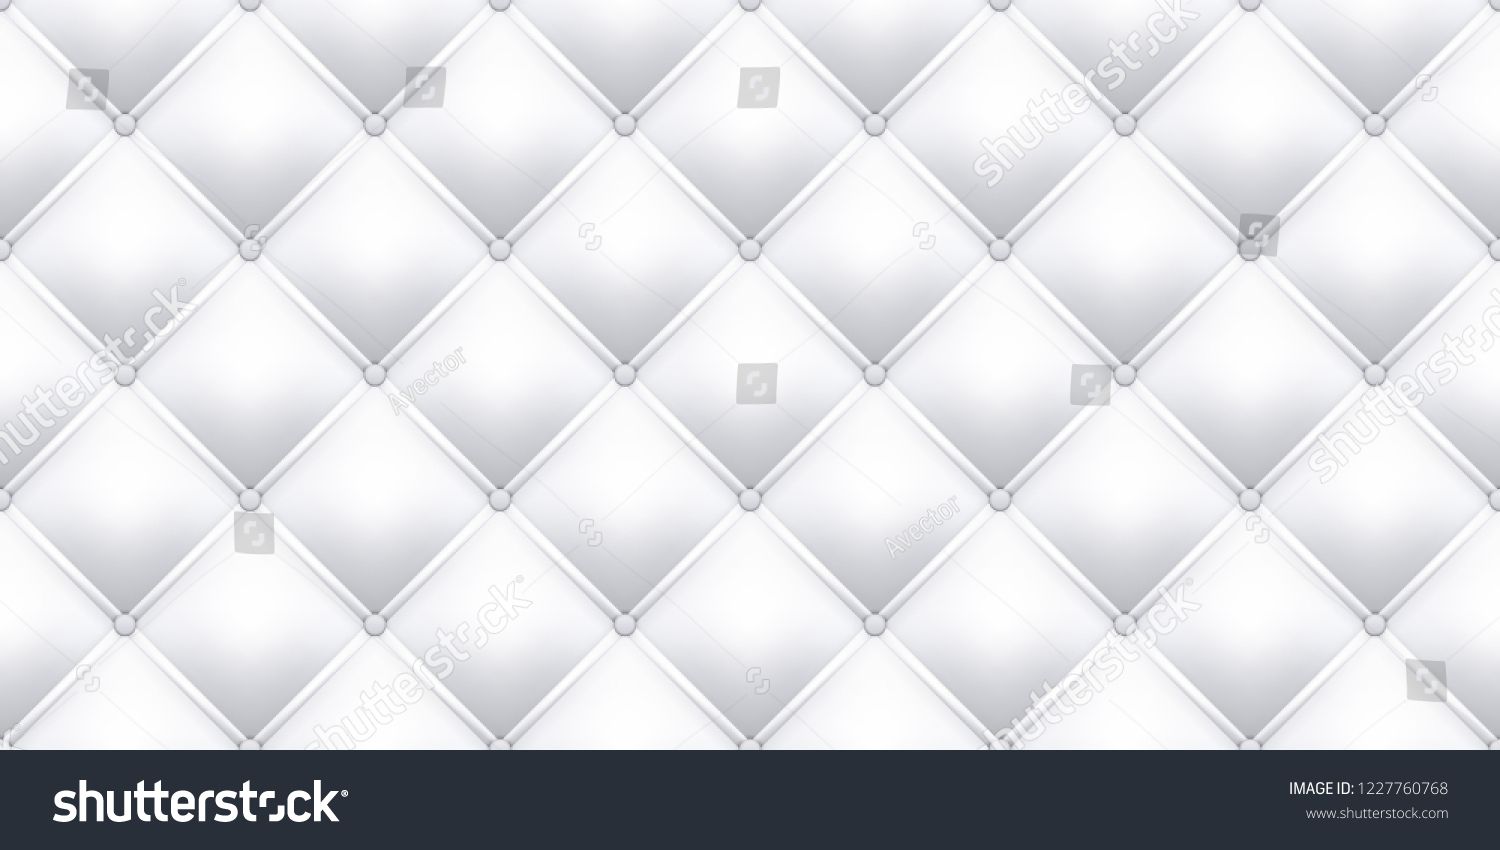 White Leather Upholstery Texture Pattern Background Vector